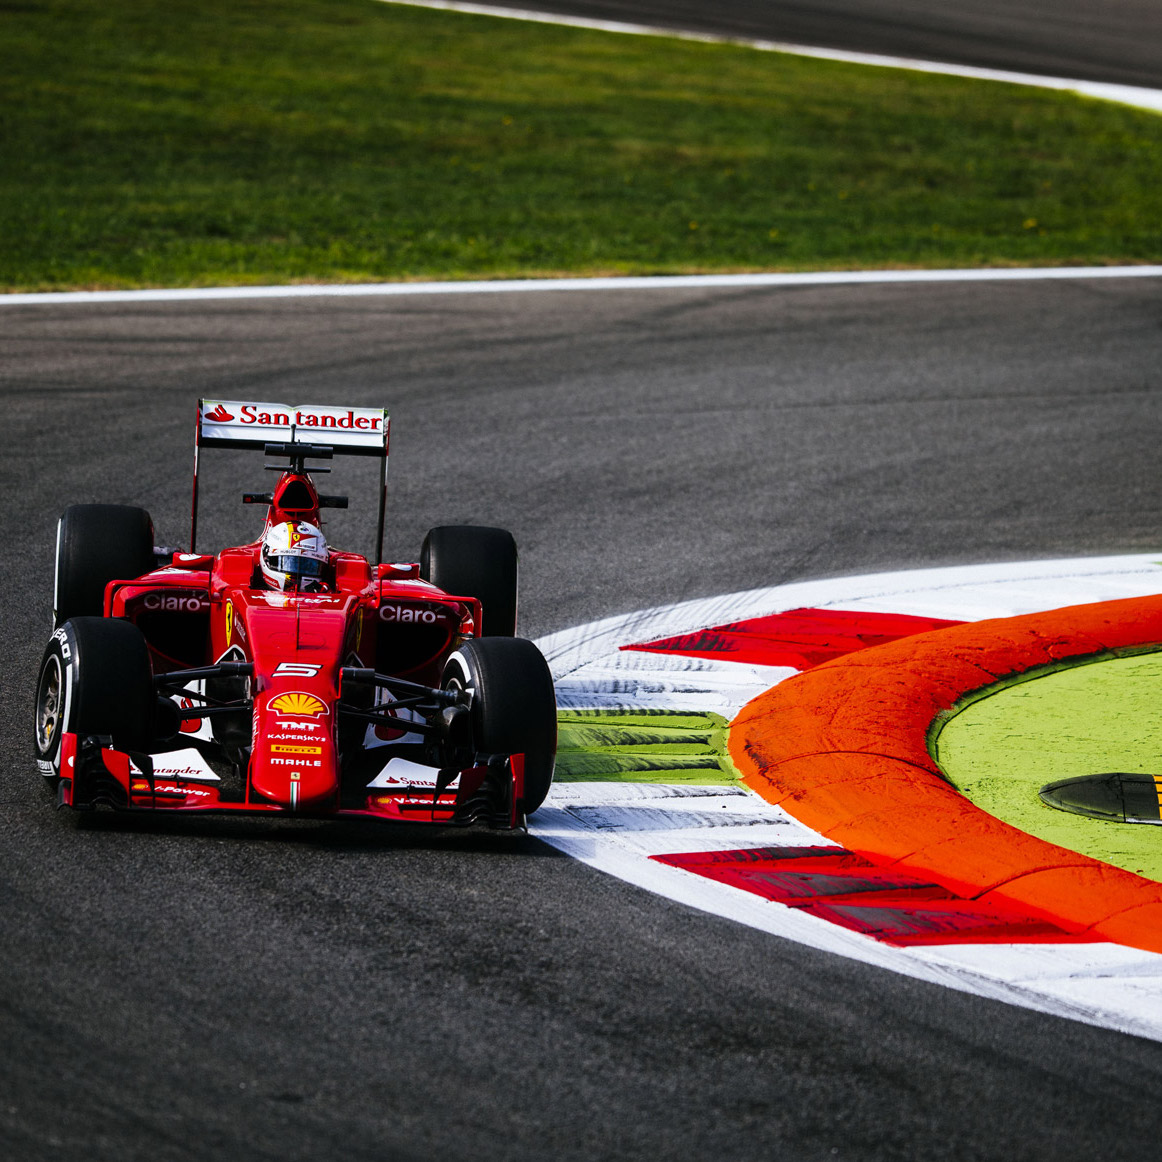 Monza Grand Prix Tickets and Hospitality